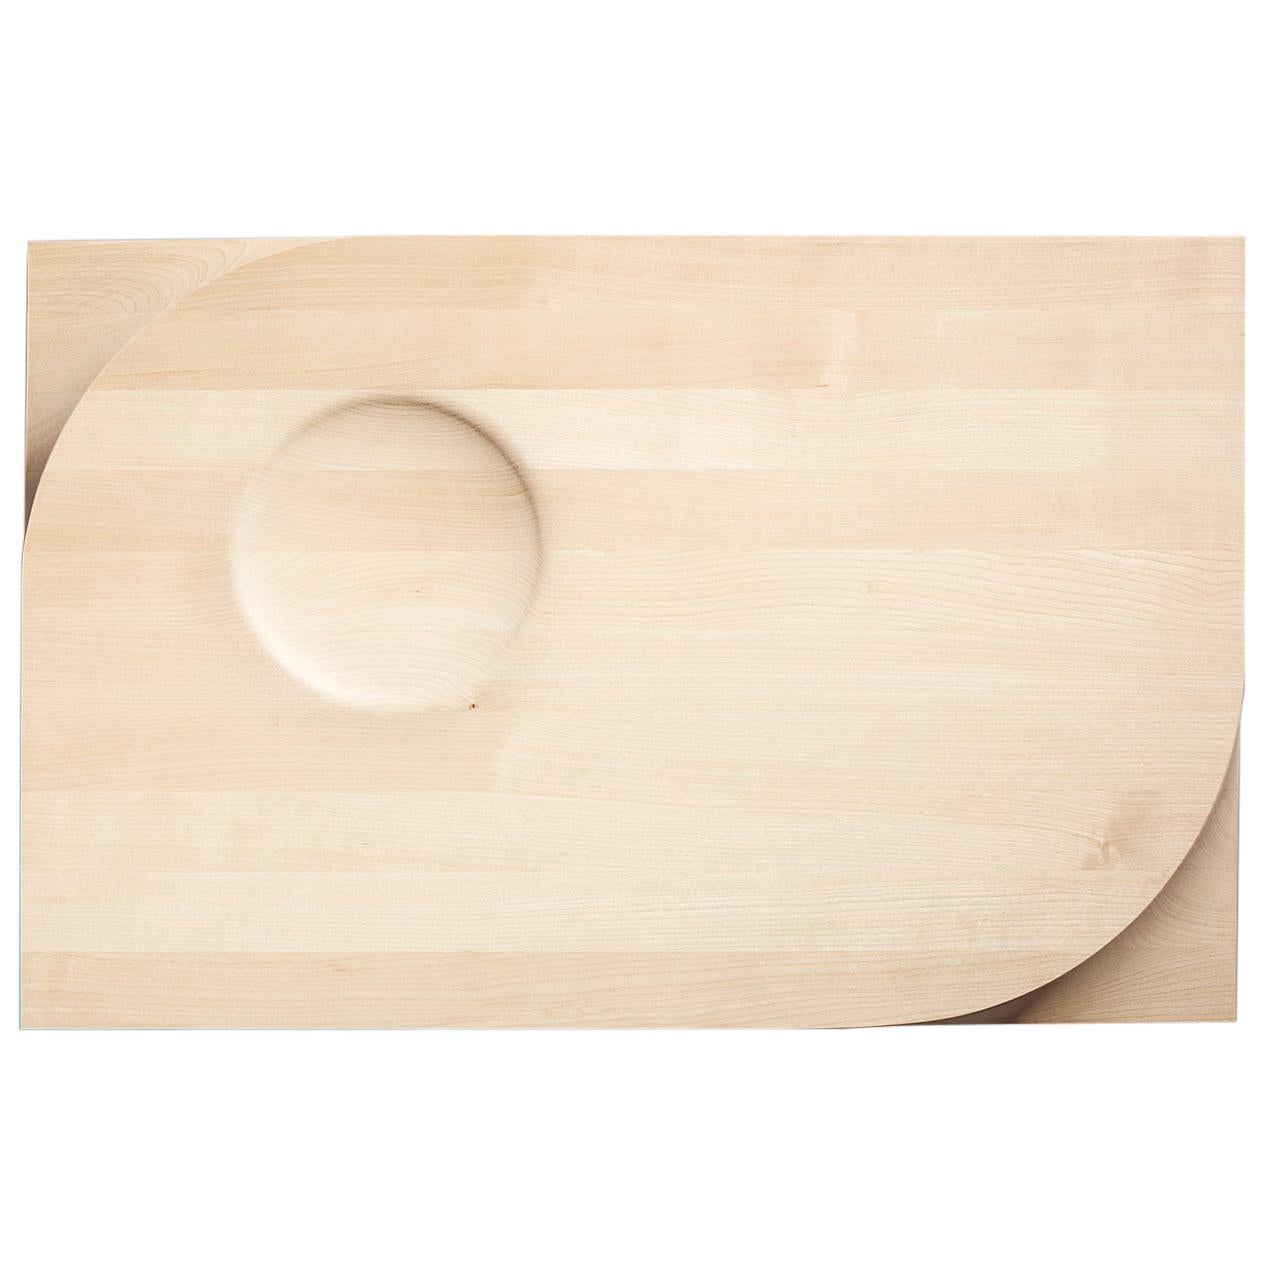 Two-sided Maple Wood Cutting Board and Serving Plate, Rettangolo, Made in Italy